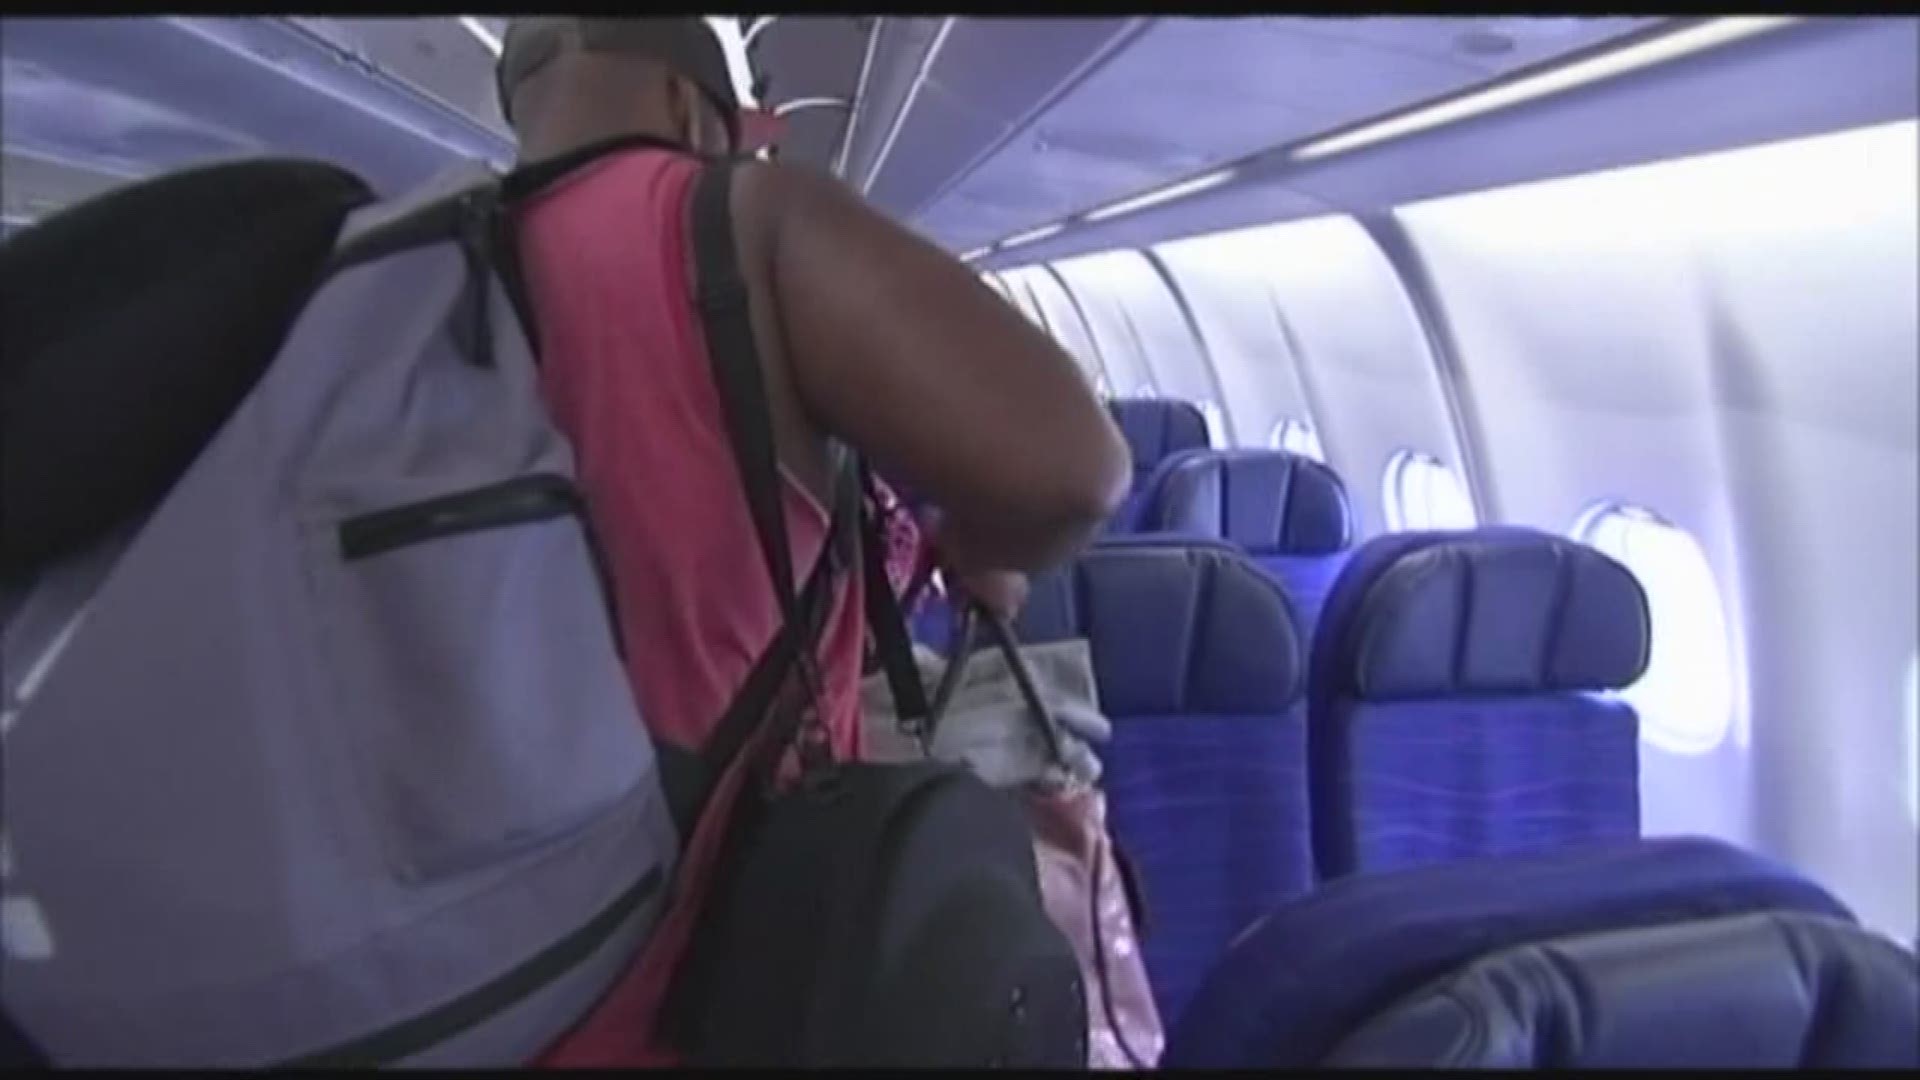 We set out to Verify what rights a passenger has when an airline uses "involuntary bumping."